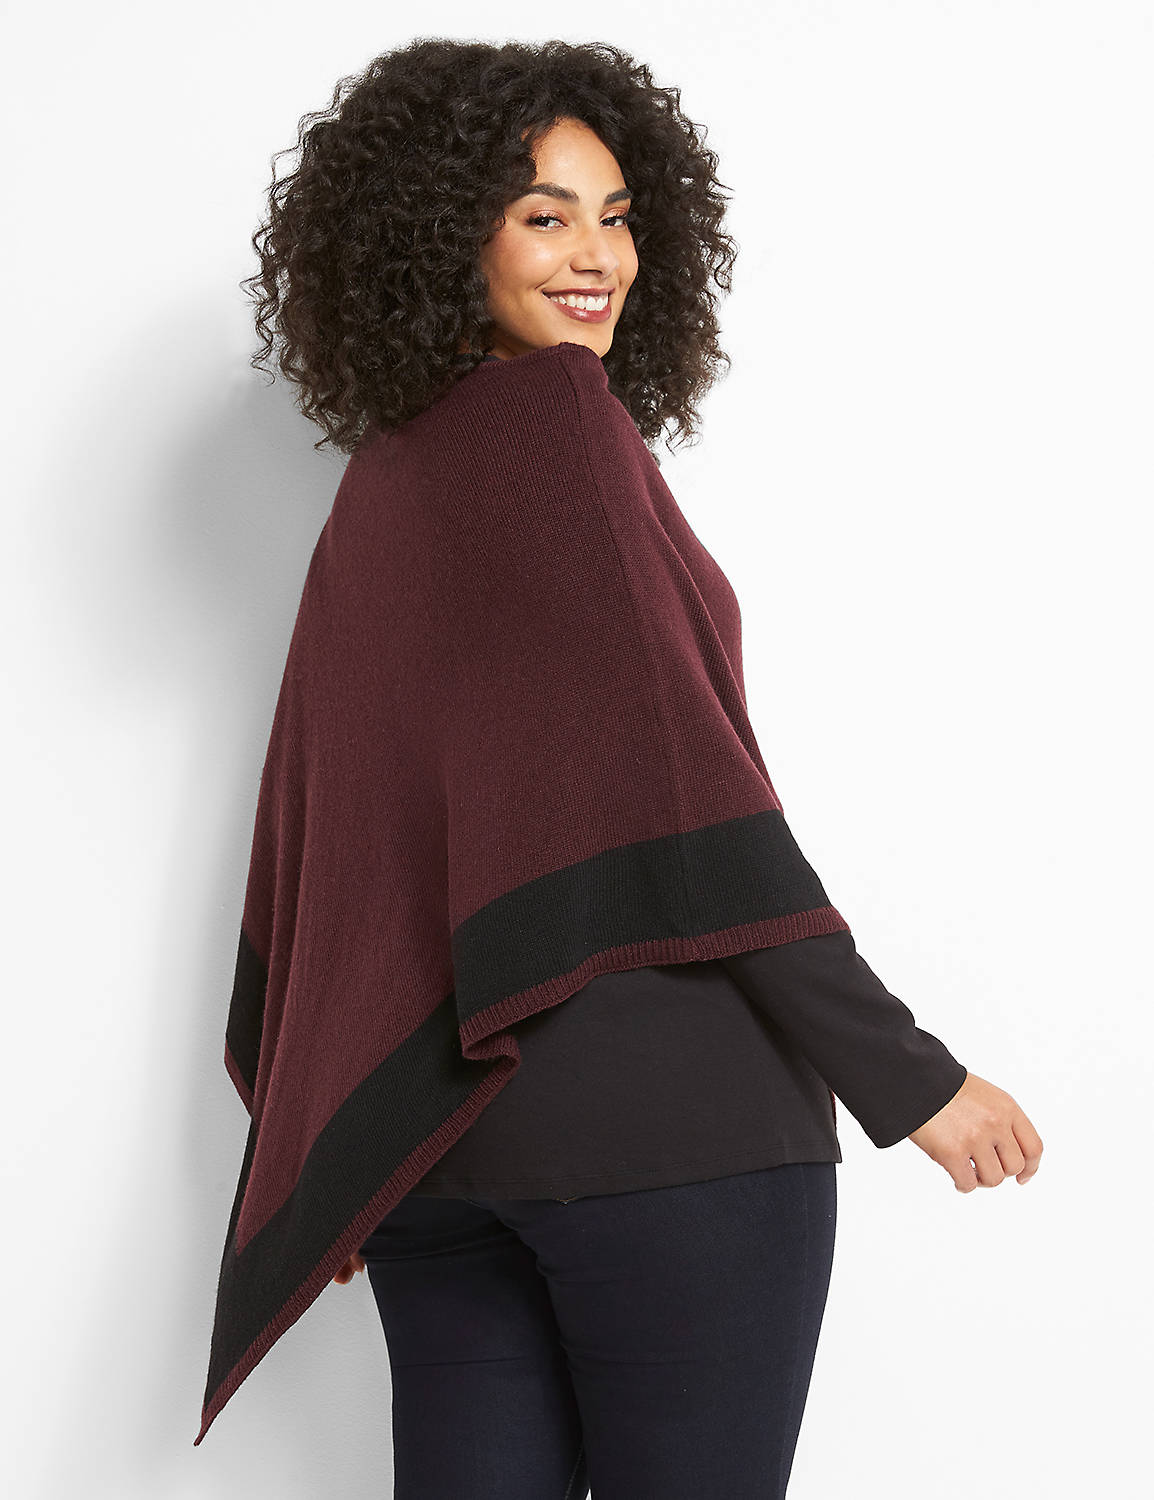 Colorblock Poncho Product Image 2